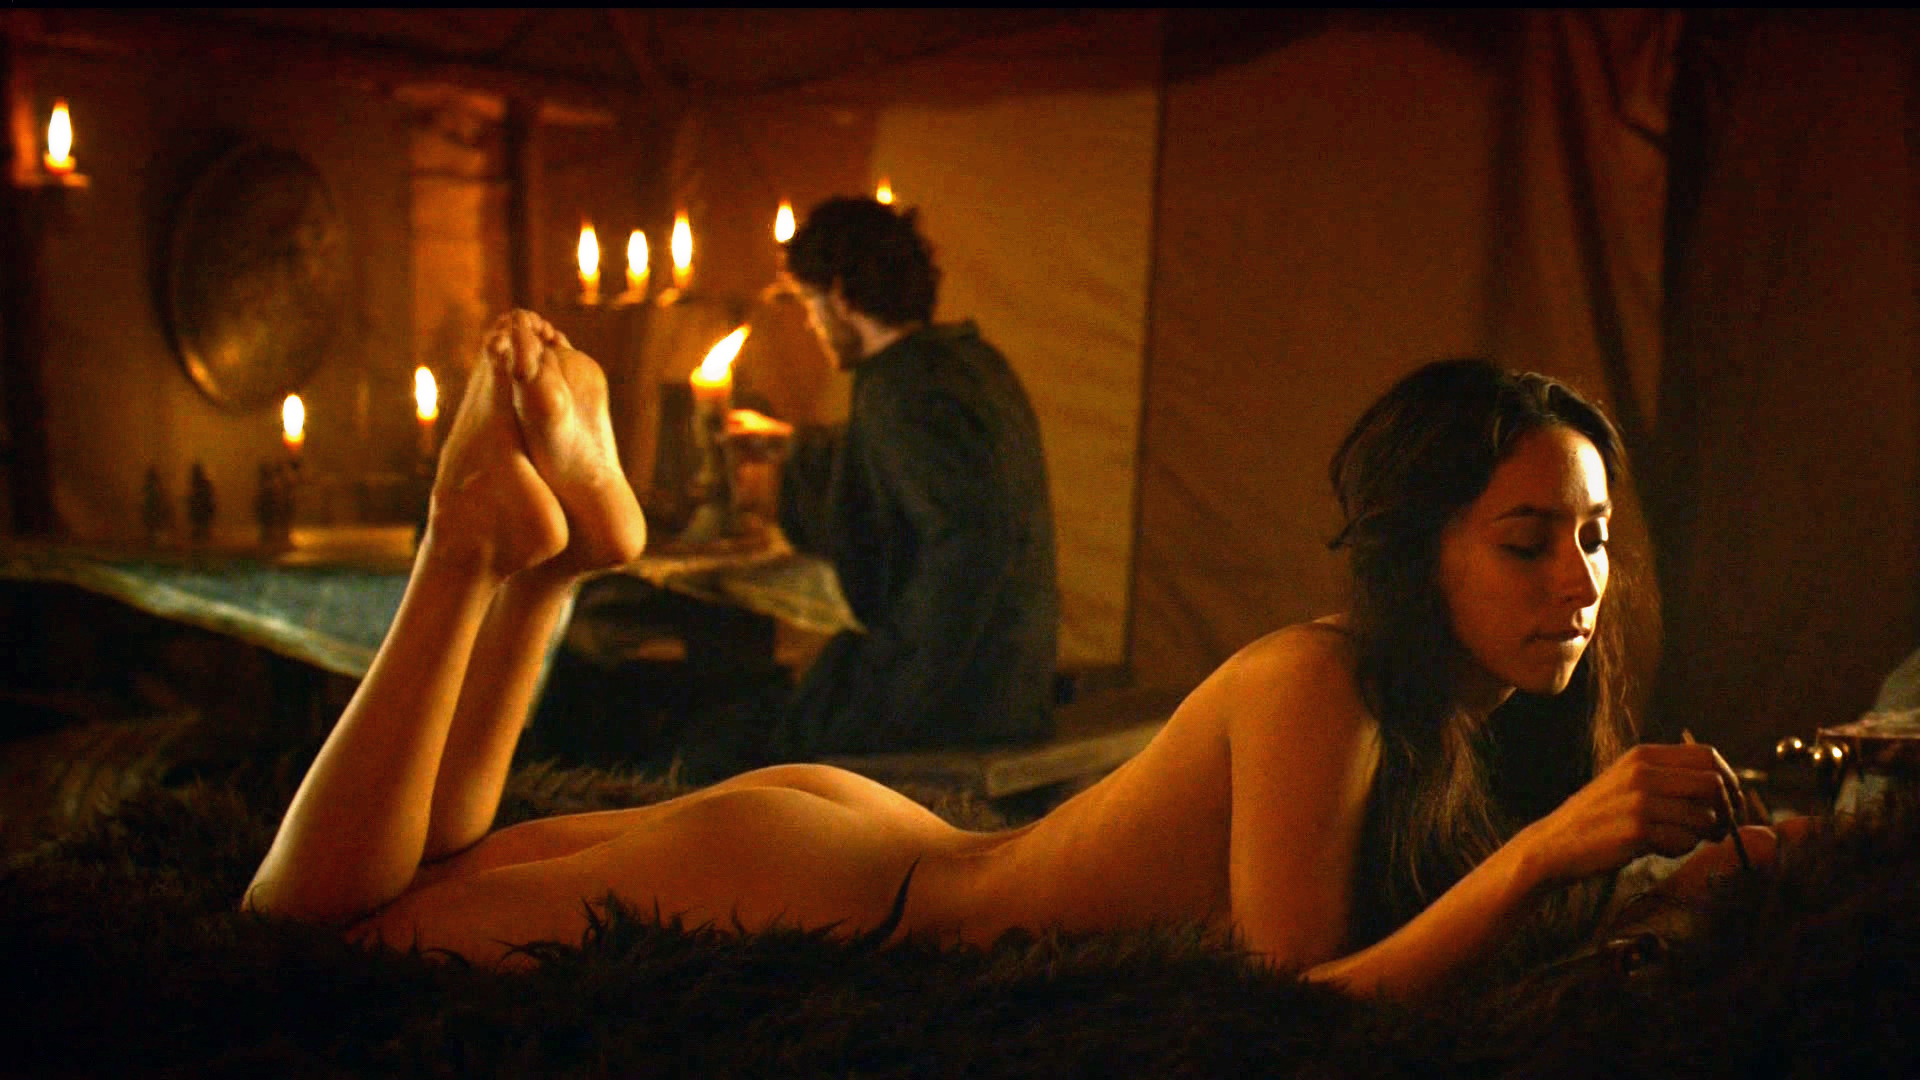 Nude Scene From Game, and oona chaplin nuda anni in game of thrones, nude v...